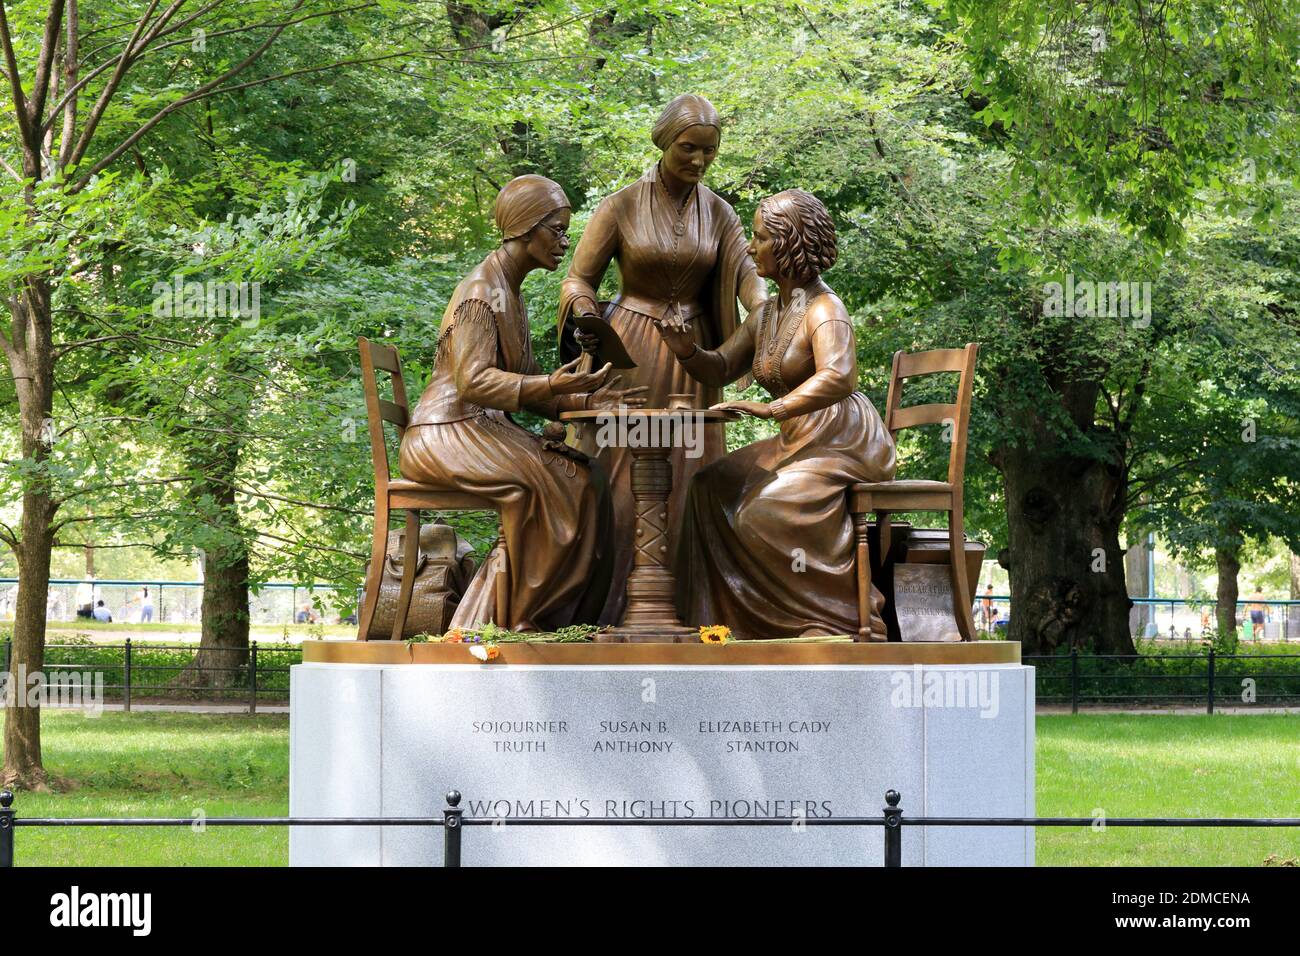 The Women’s Rights Pioneers' sculpture by Meredith Bergmann in Central Park, New York, NY. Stock Photo